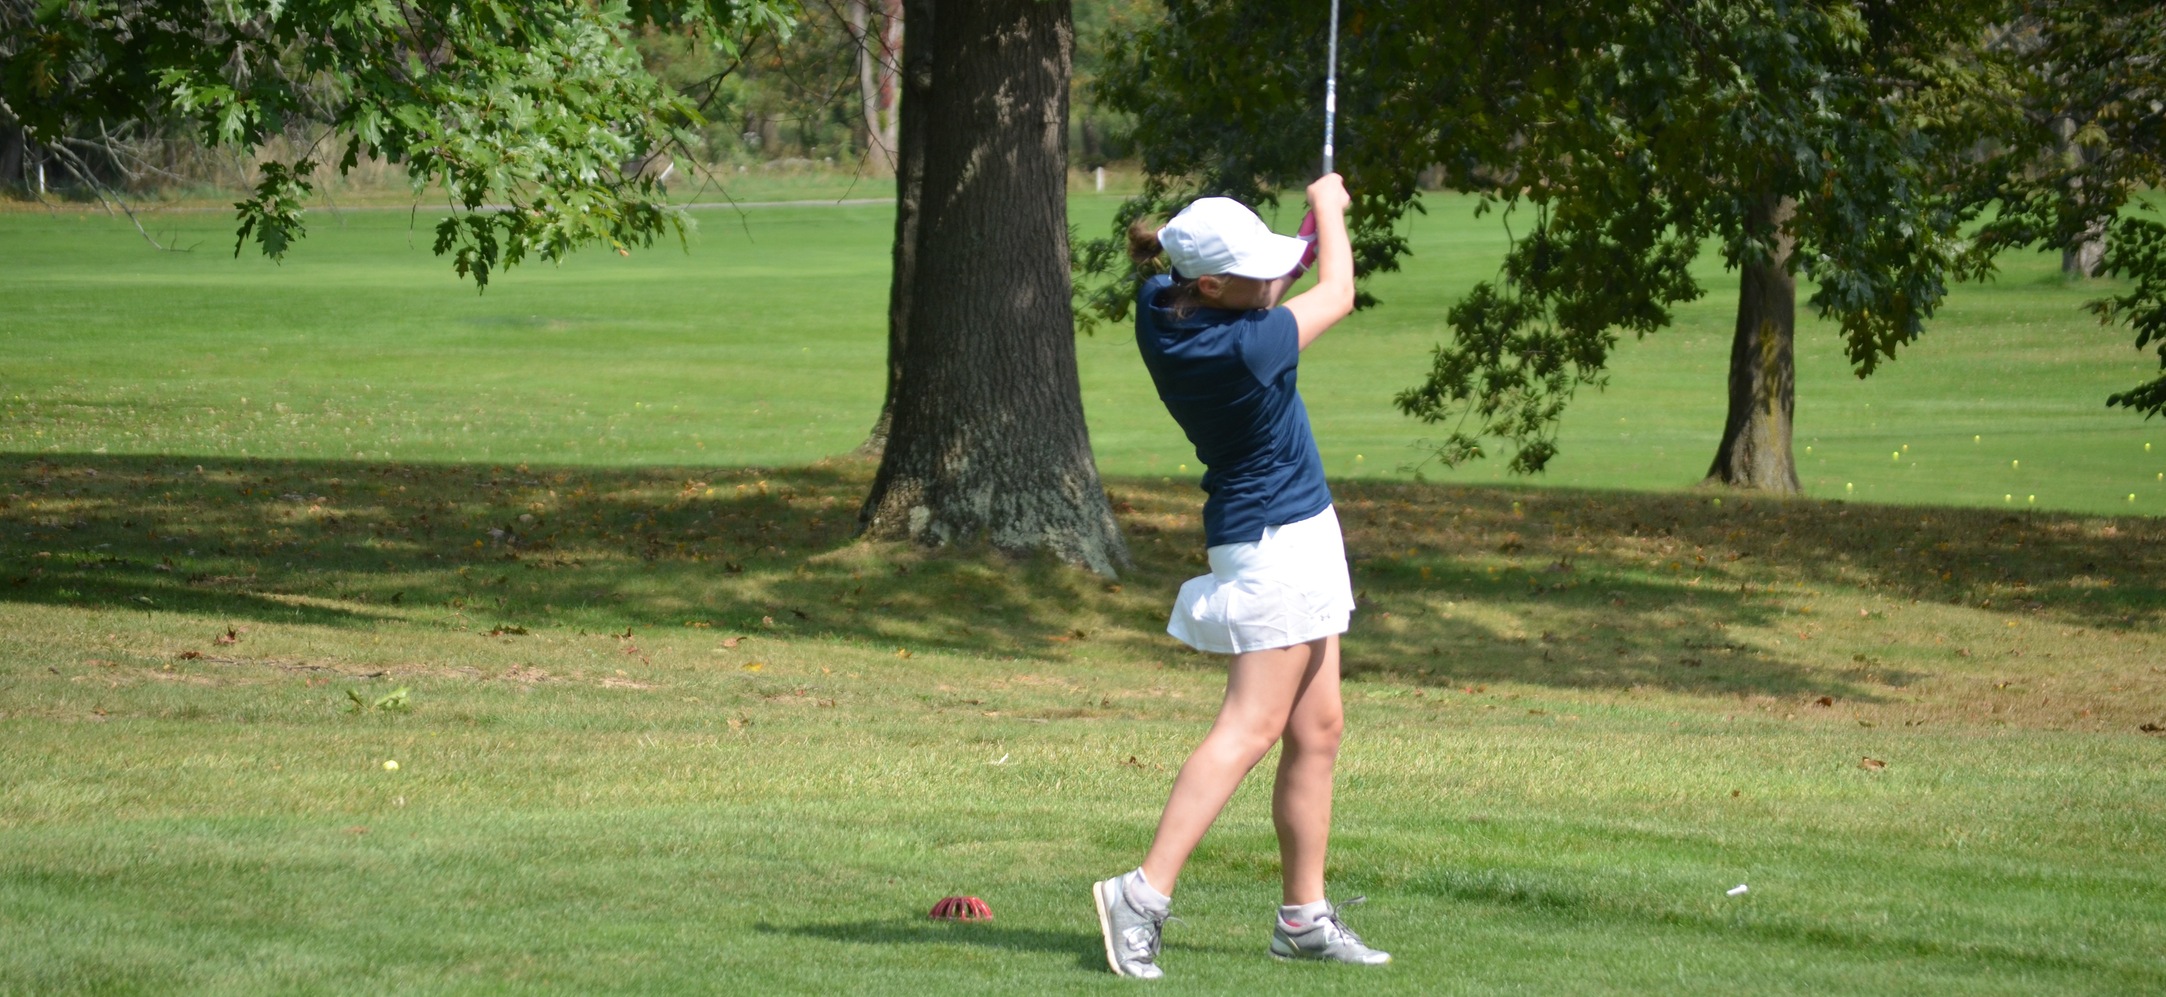 Women's Golf in Sixth after Day One of Landmark Championships